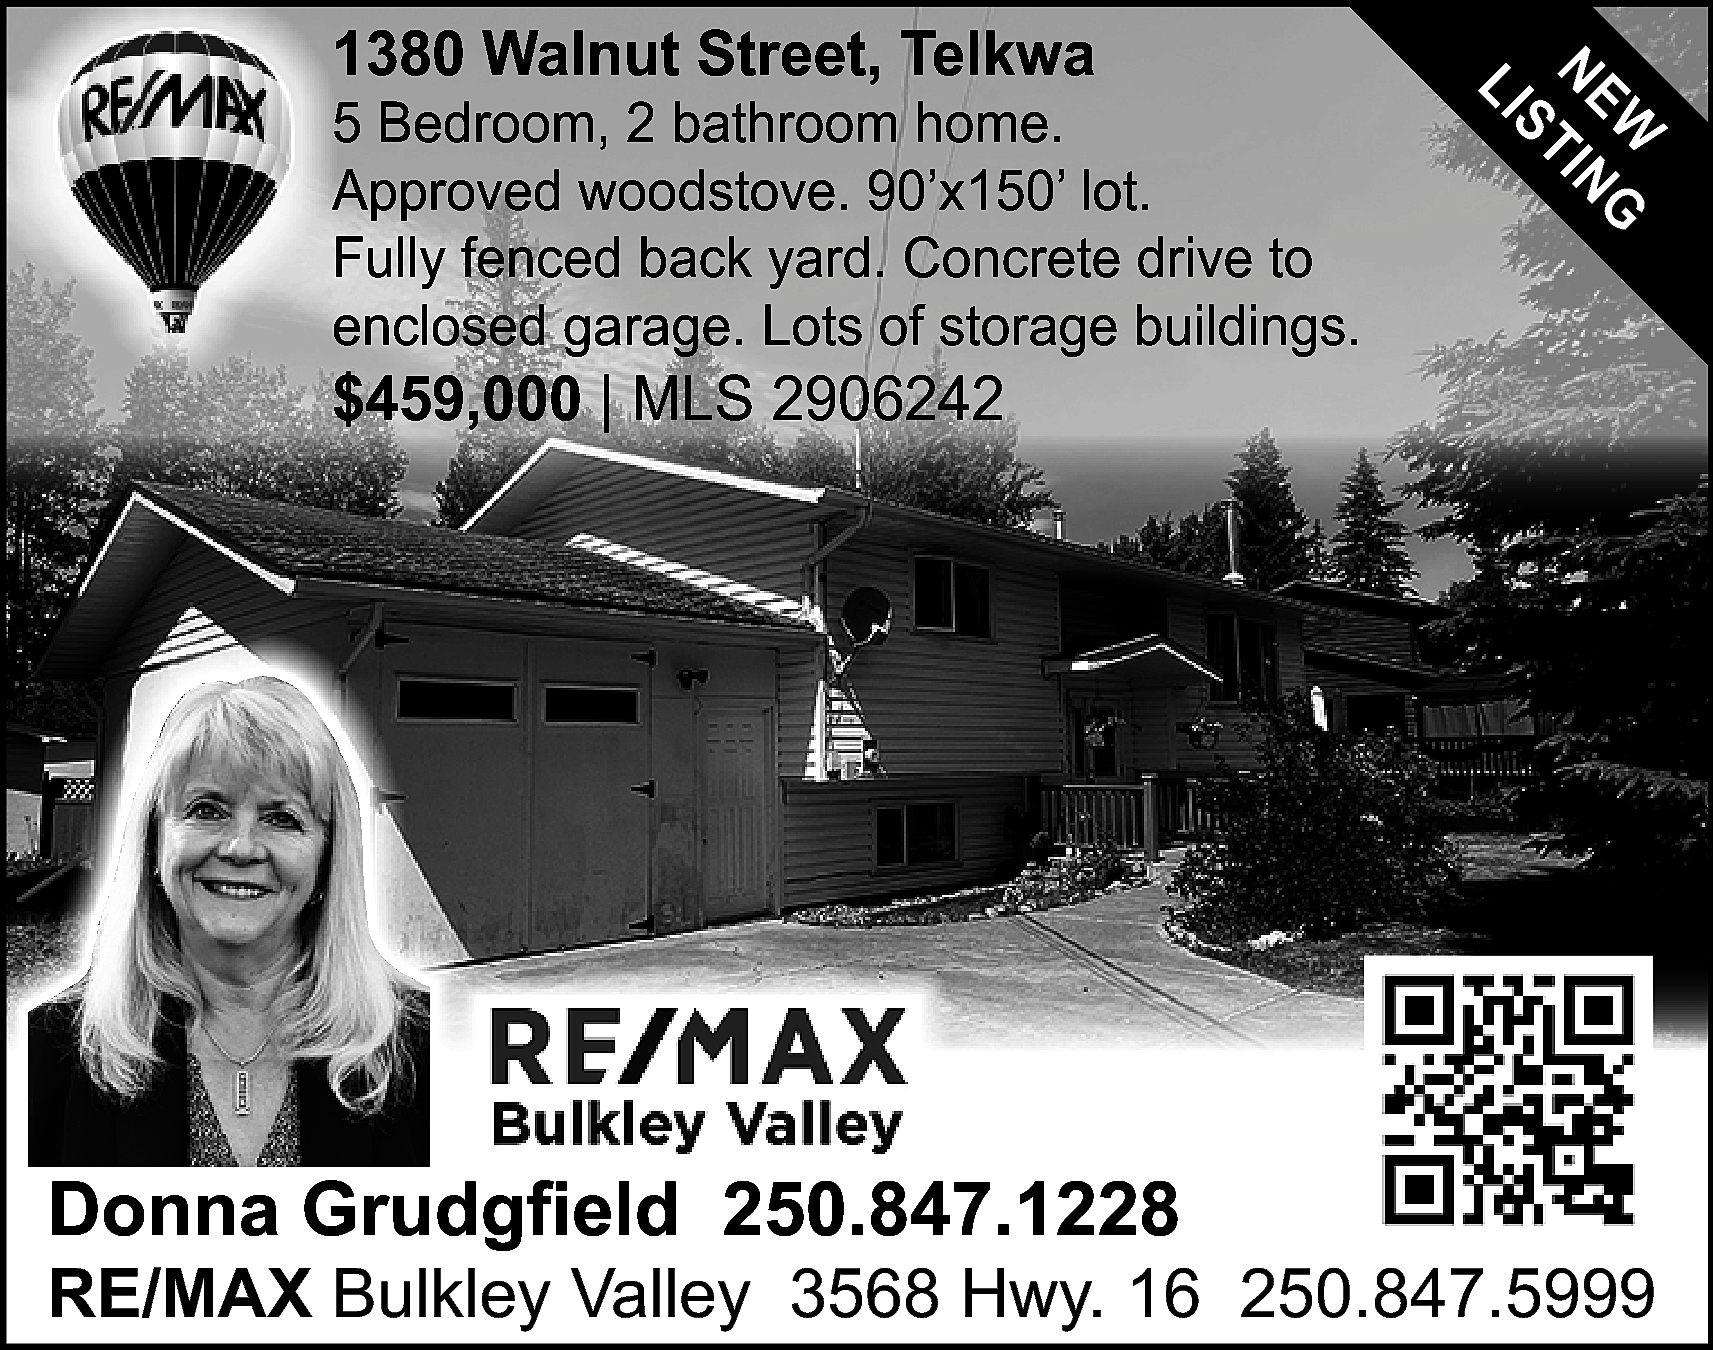 W G <br>NE TIN <br>S  W G  NE TIN  S  LI    1380 Walnut Street, Telkwa    5 Bedroom, 2 bathroom home.  Approved woodstove. 90’x150’ lot.  Fully fenced back yard. Concrete drive to  enclosed garage. Lots of storage buildings.    $459,000 | MLS 2906242    Donna Grudgfield 250.847.1228    RE/MAX Bulkley Valley 3568 Hwy. 16 250.847.5999    